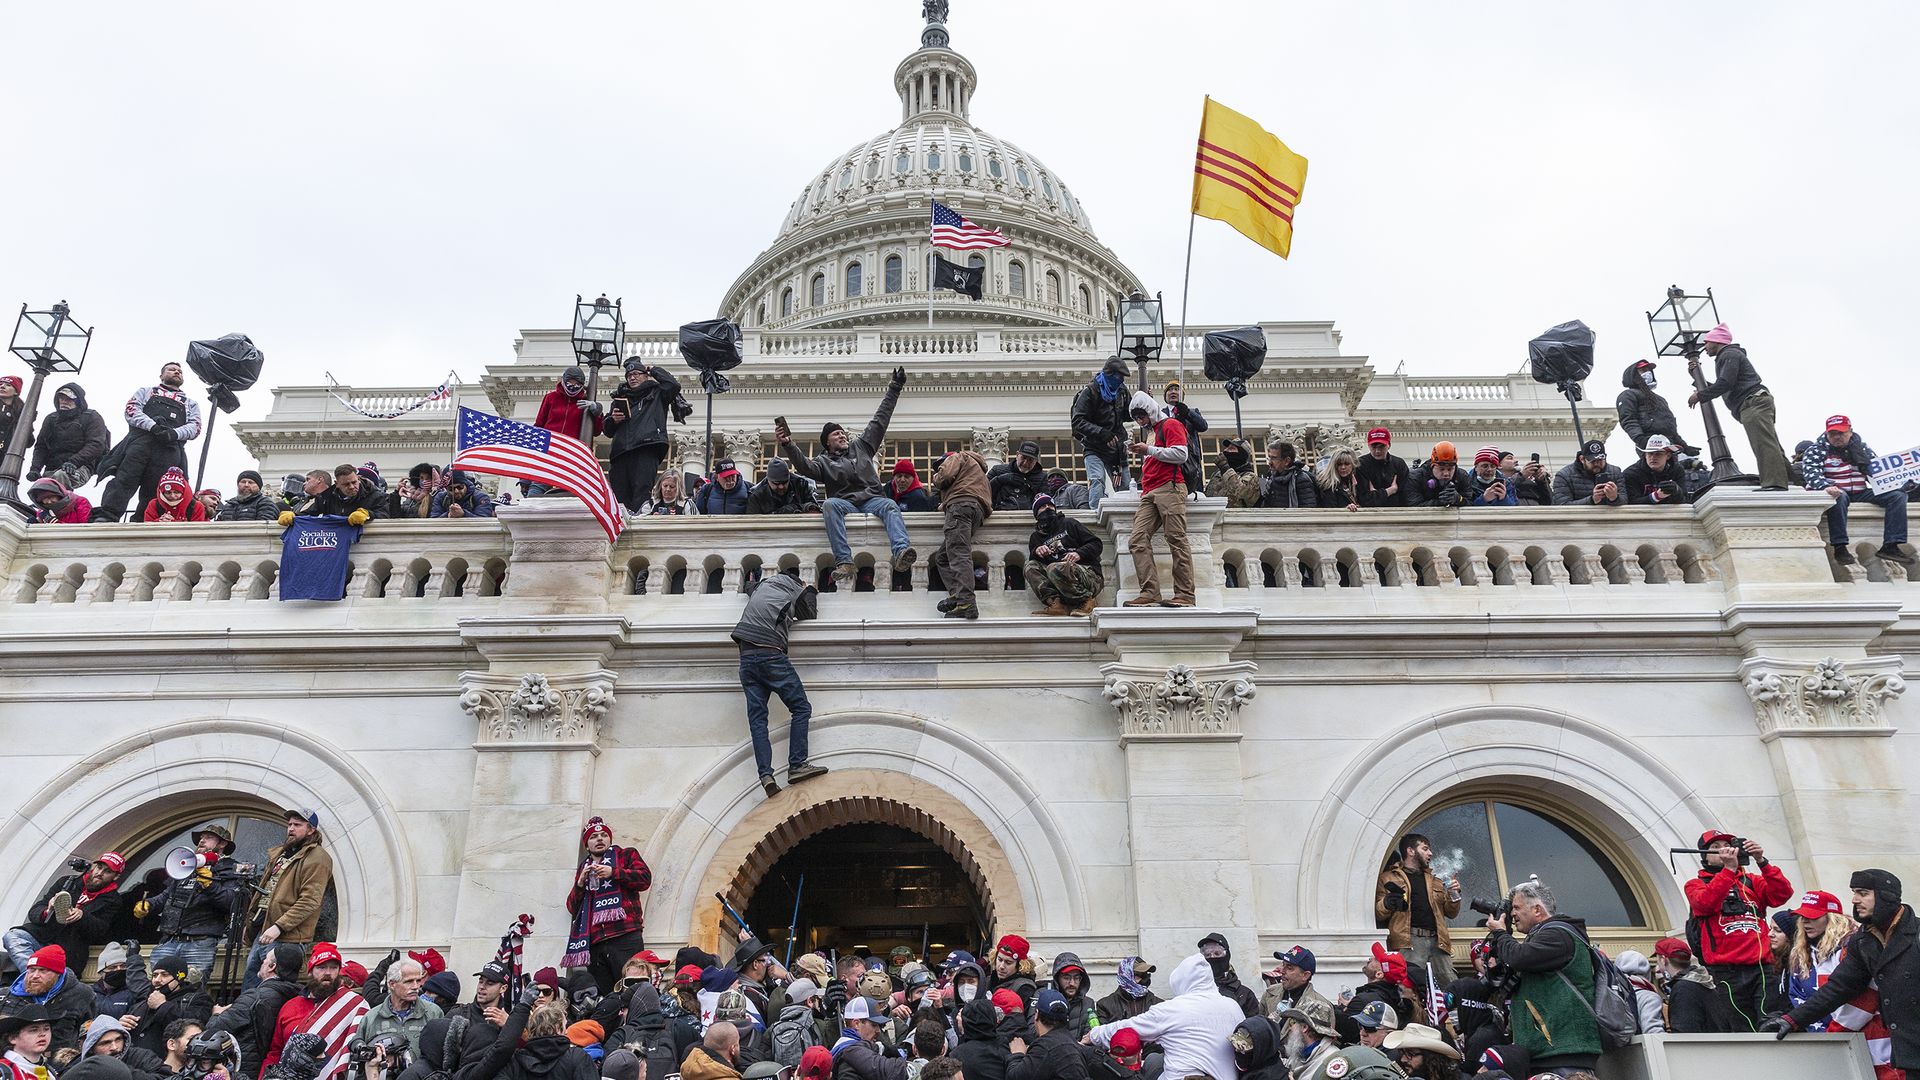 Protesters at the Capitol building. Photo by Lev Radin/Pacific Press/LightRocket via Getty Images)